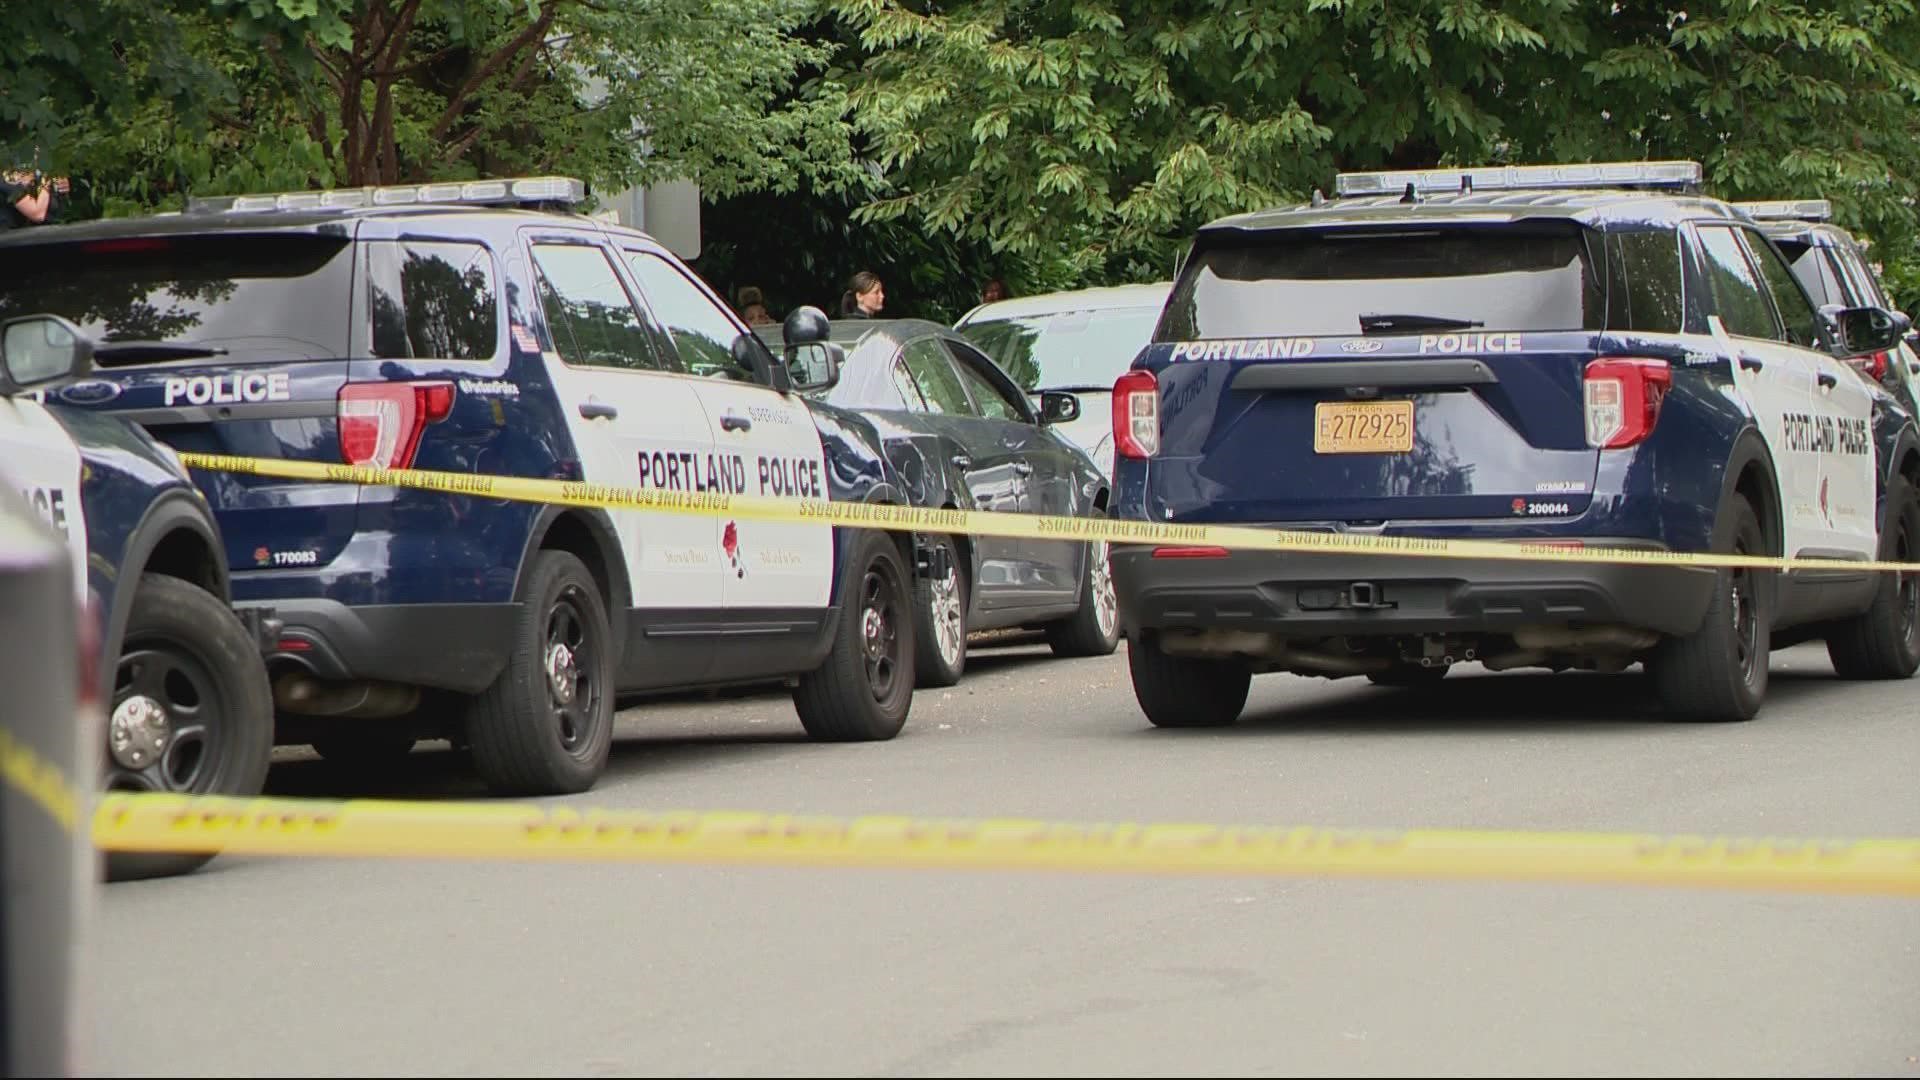 Even as police responded to a second deadly shooting within 24 hours, Mayor Ted Wheeler released a new report about Portland's gun violence problem.